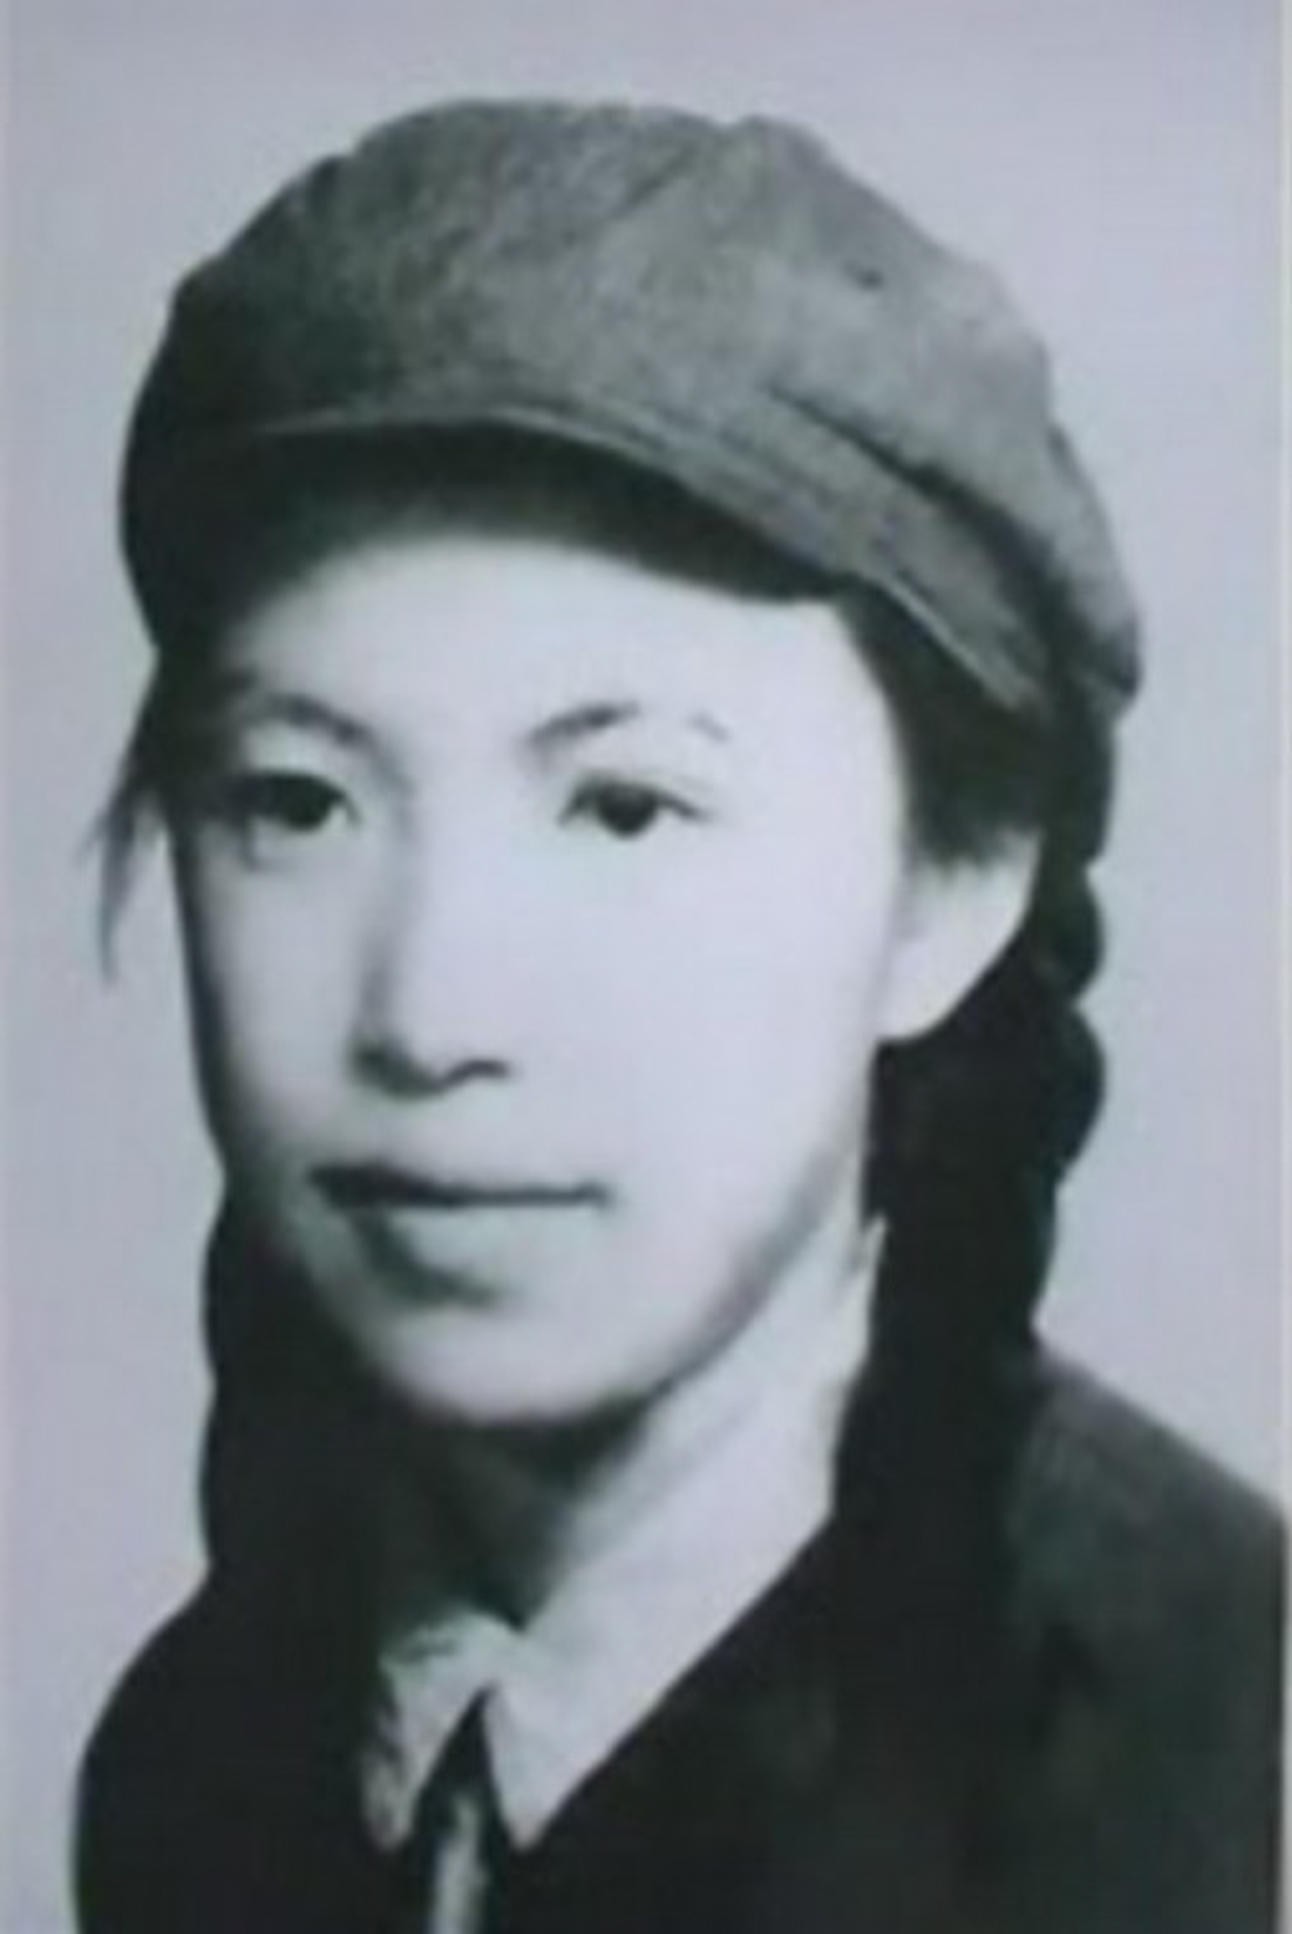 Lian Xi’s book tells the untold tale of Lin Zhao, a Chinese dissident who showed her contempt for Mao’s regime through letters written in her own blood